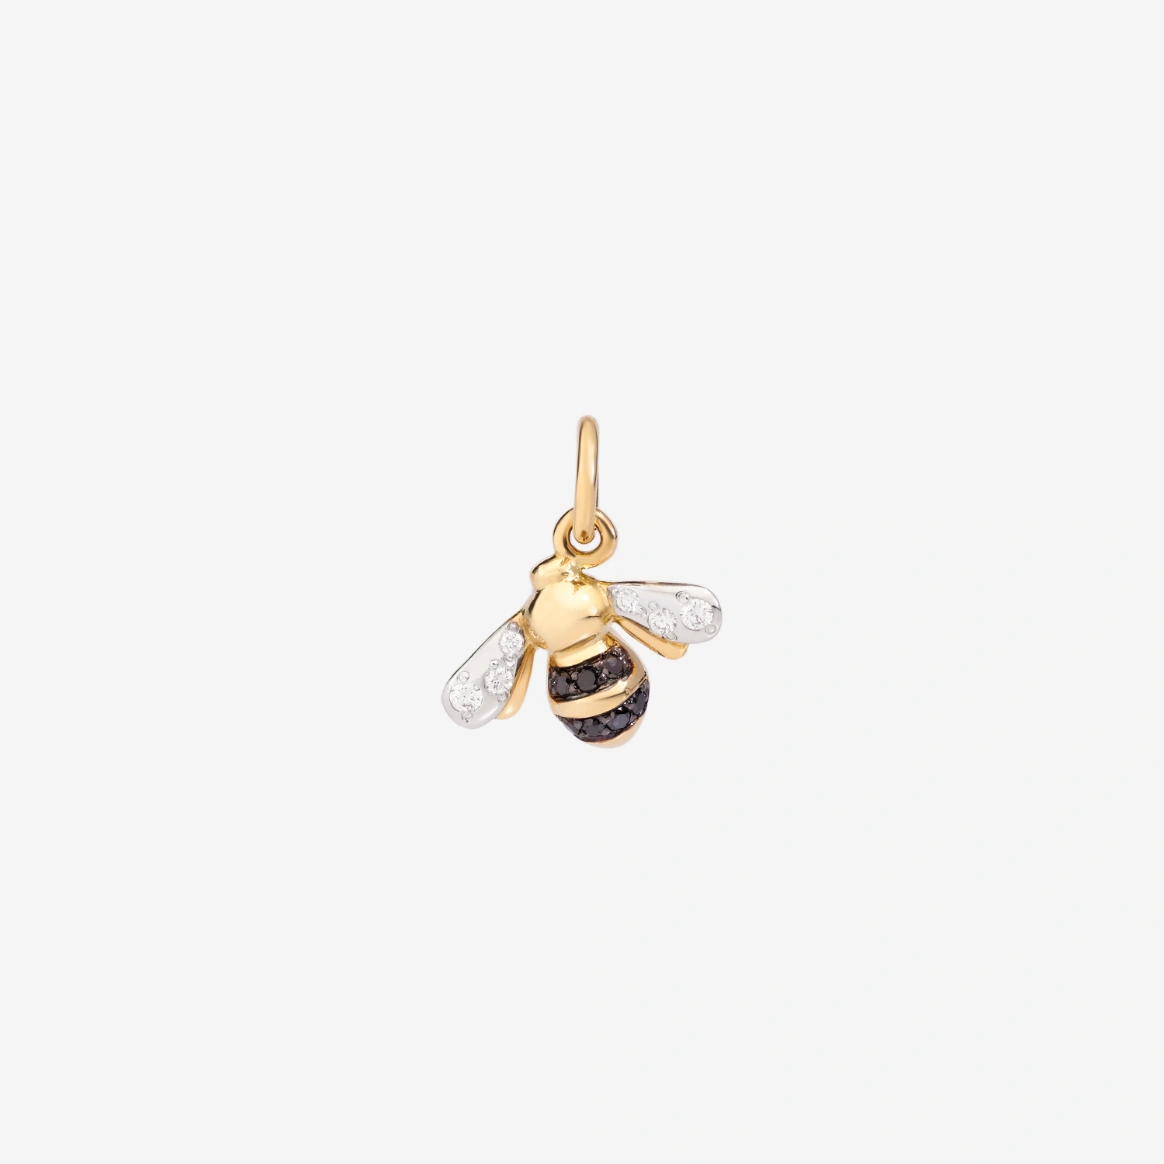 Dodo Bee Charm in 18k Yellow Gold with White and Black Diamonds - Orsini Jewellers